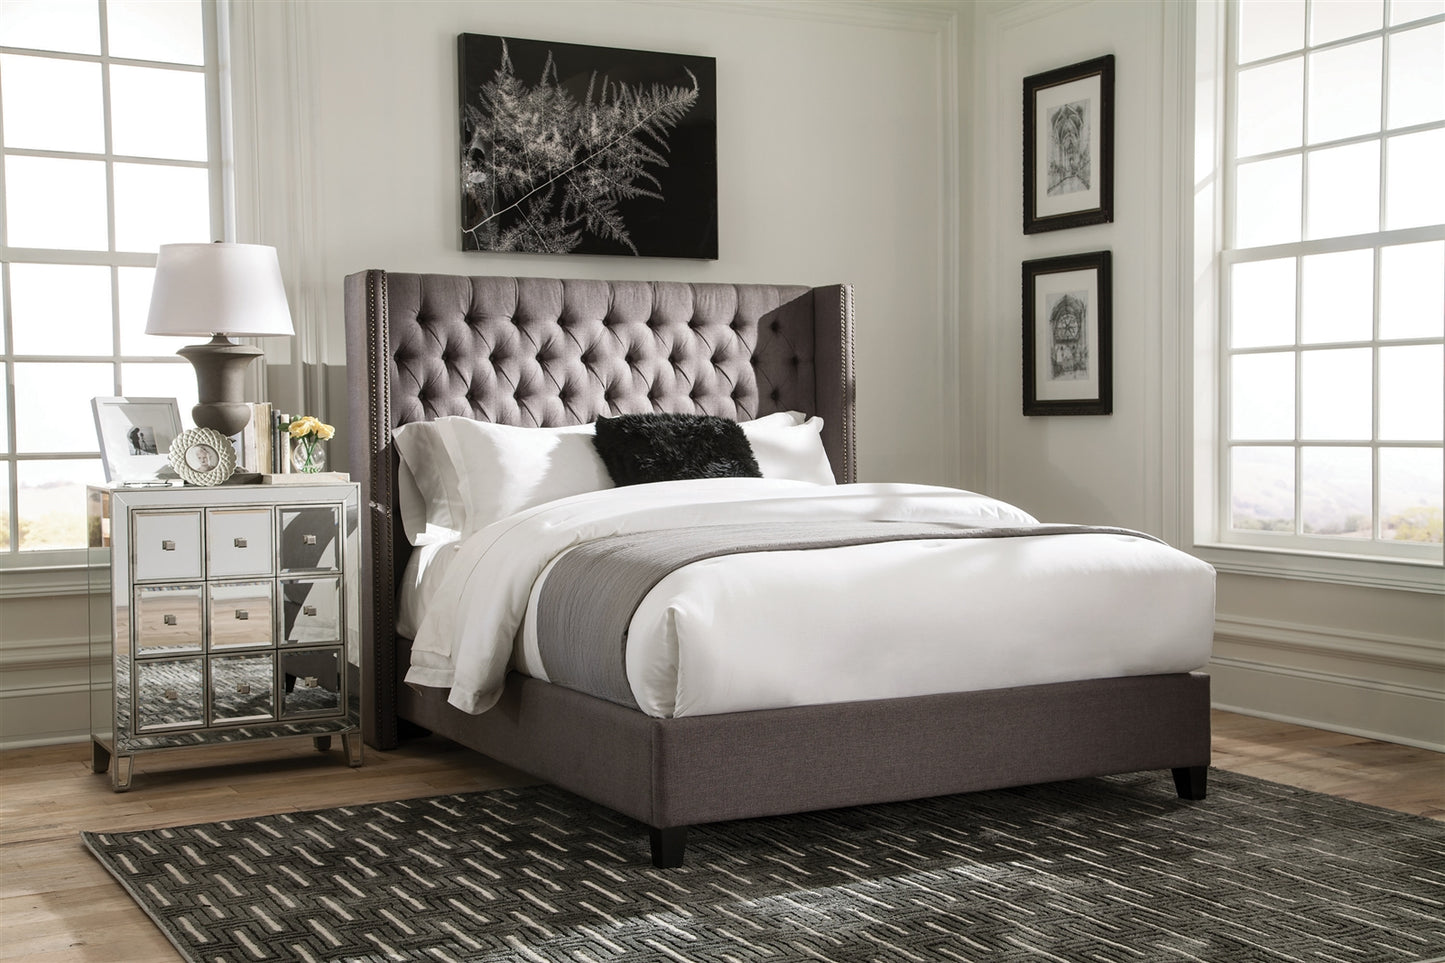 Bancroft Demi-Wing Queen Bed in Grey Woven Fabric